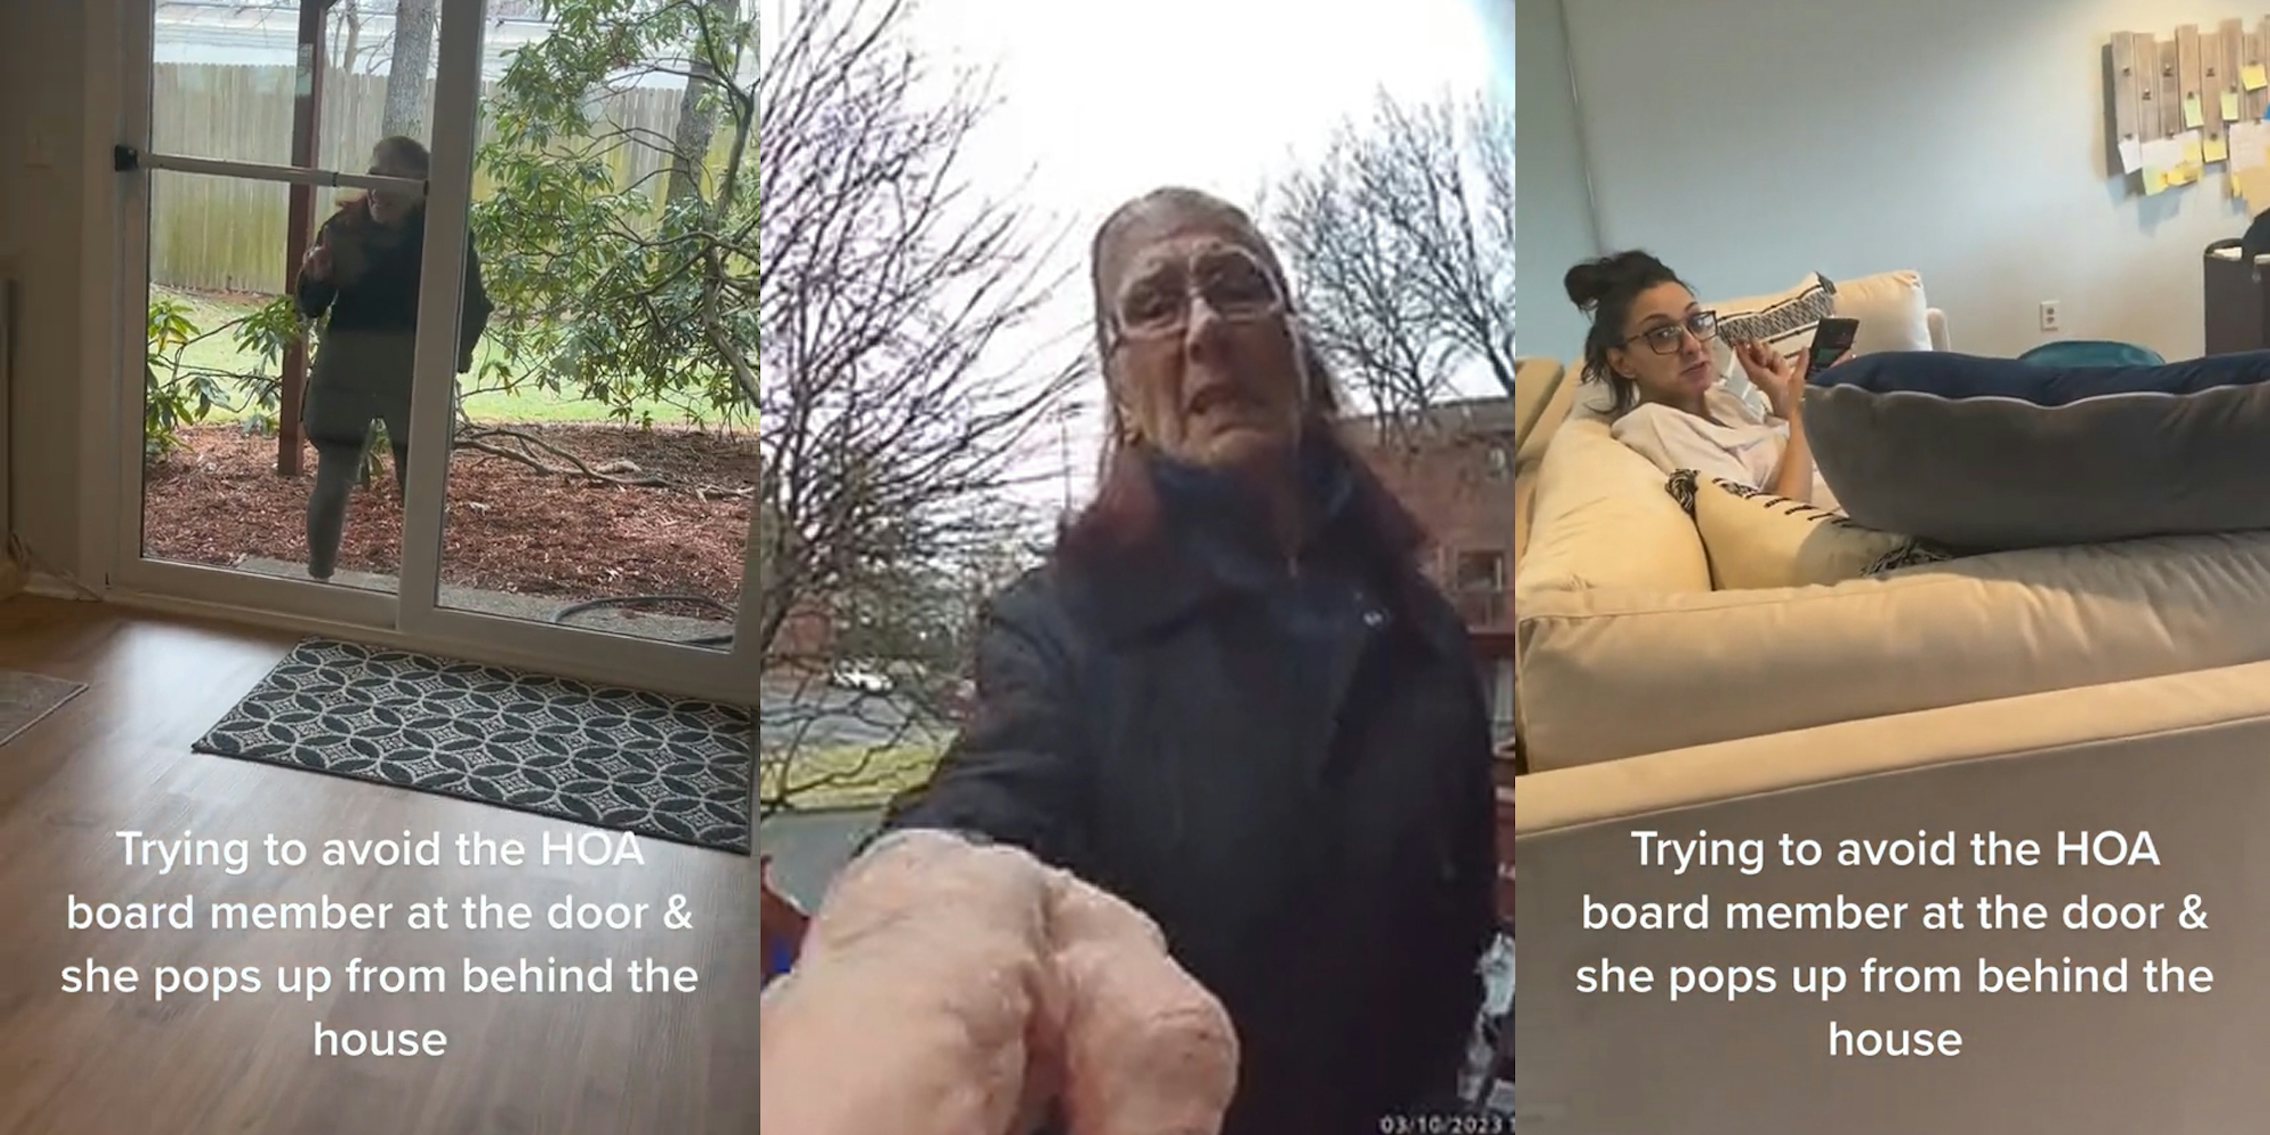 HOA member knocking on door with caption 'Trying to avoid the HOA board member at the door & she pops up from behind the house' (l) HOA member seen on ring camera footage ringing doorbell (c) person on couch with caption 'Trying to avoid the HOA board member at the door & she pops up from behind the house' (r)